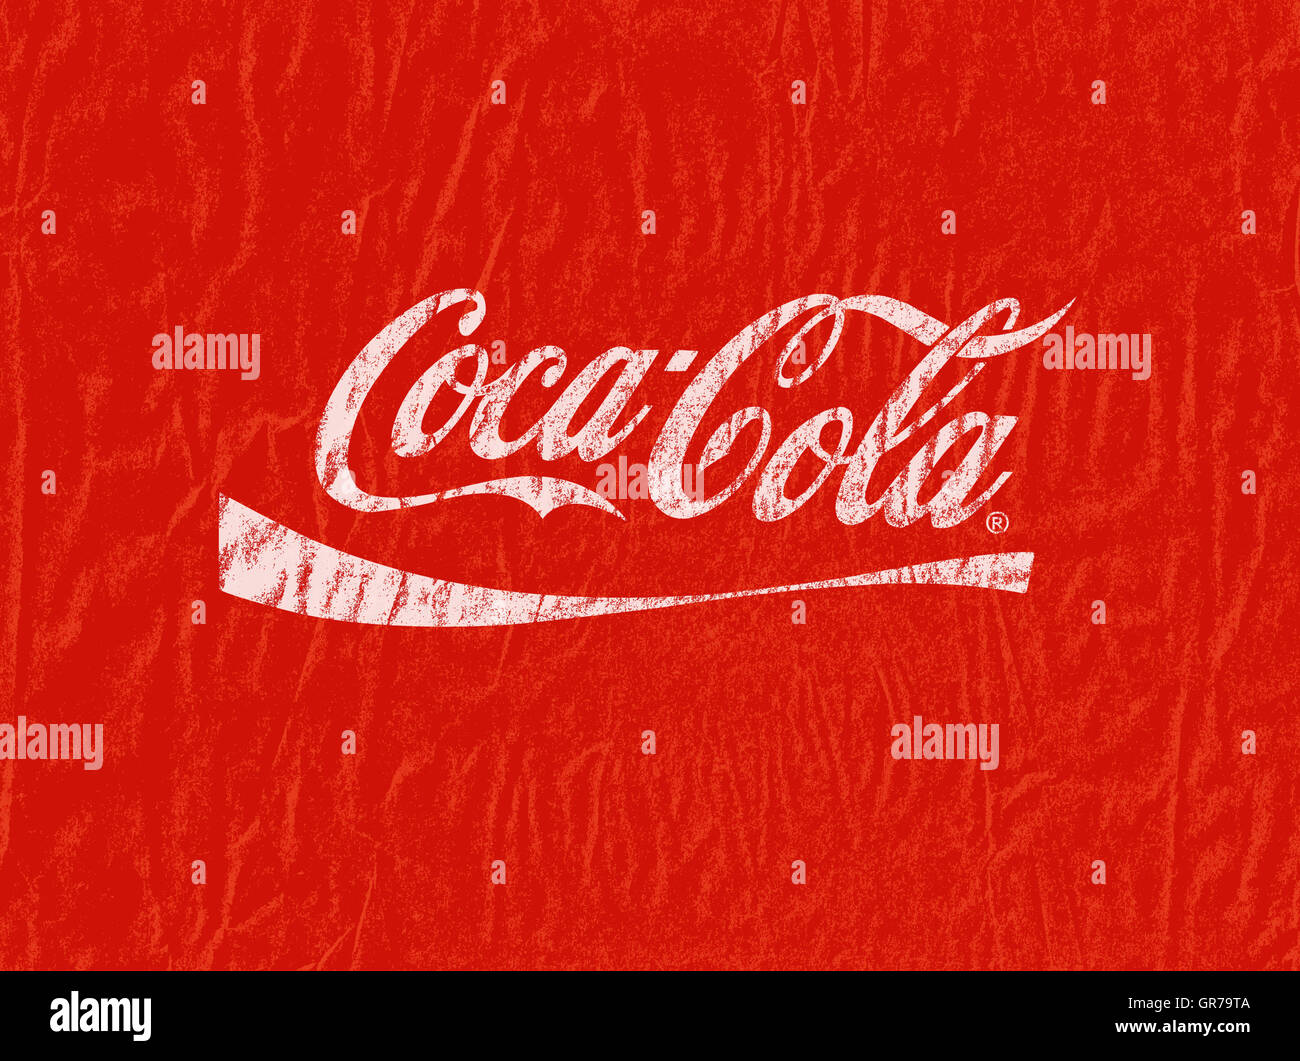 Illustration Of Grungy, Cracked Old Sign Of Coca Cola On Shabby Red Background Stock Photo